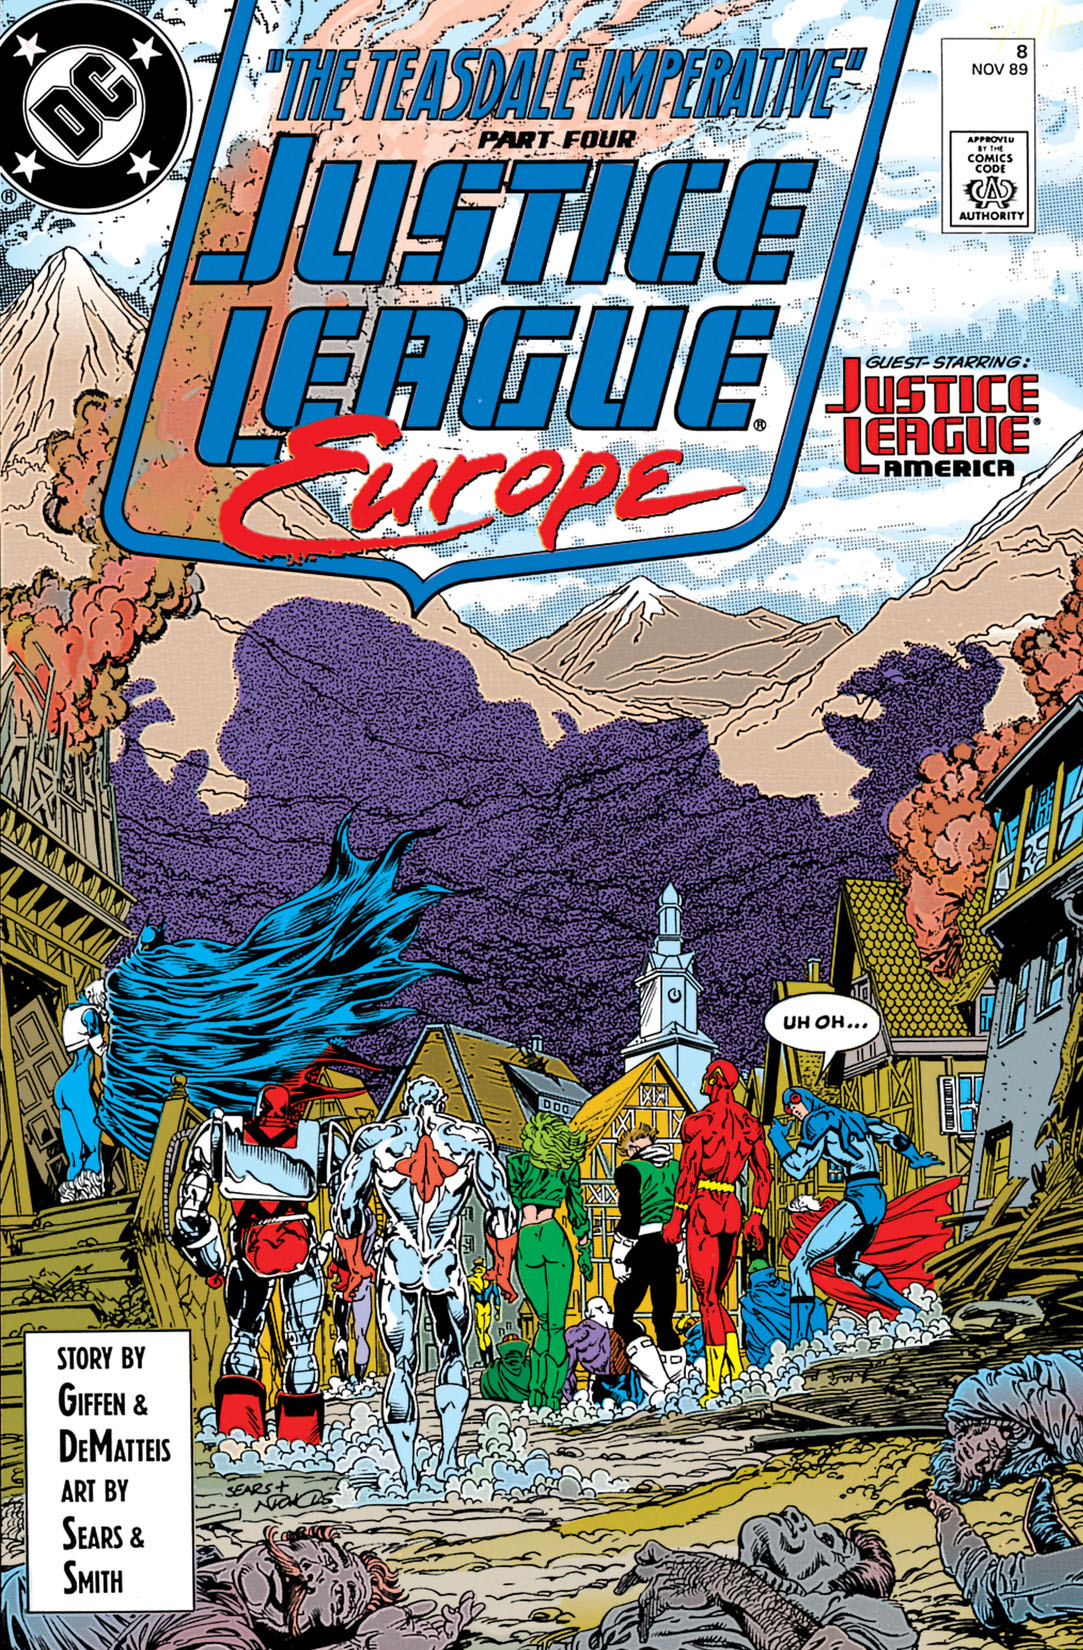 Justice League Europe #8 preview images